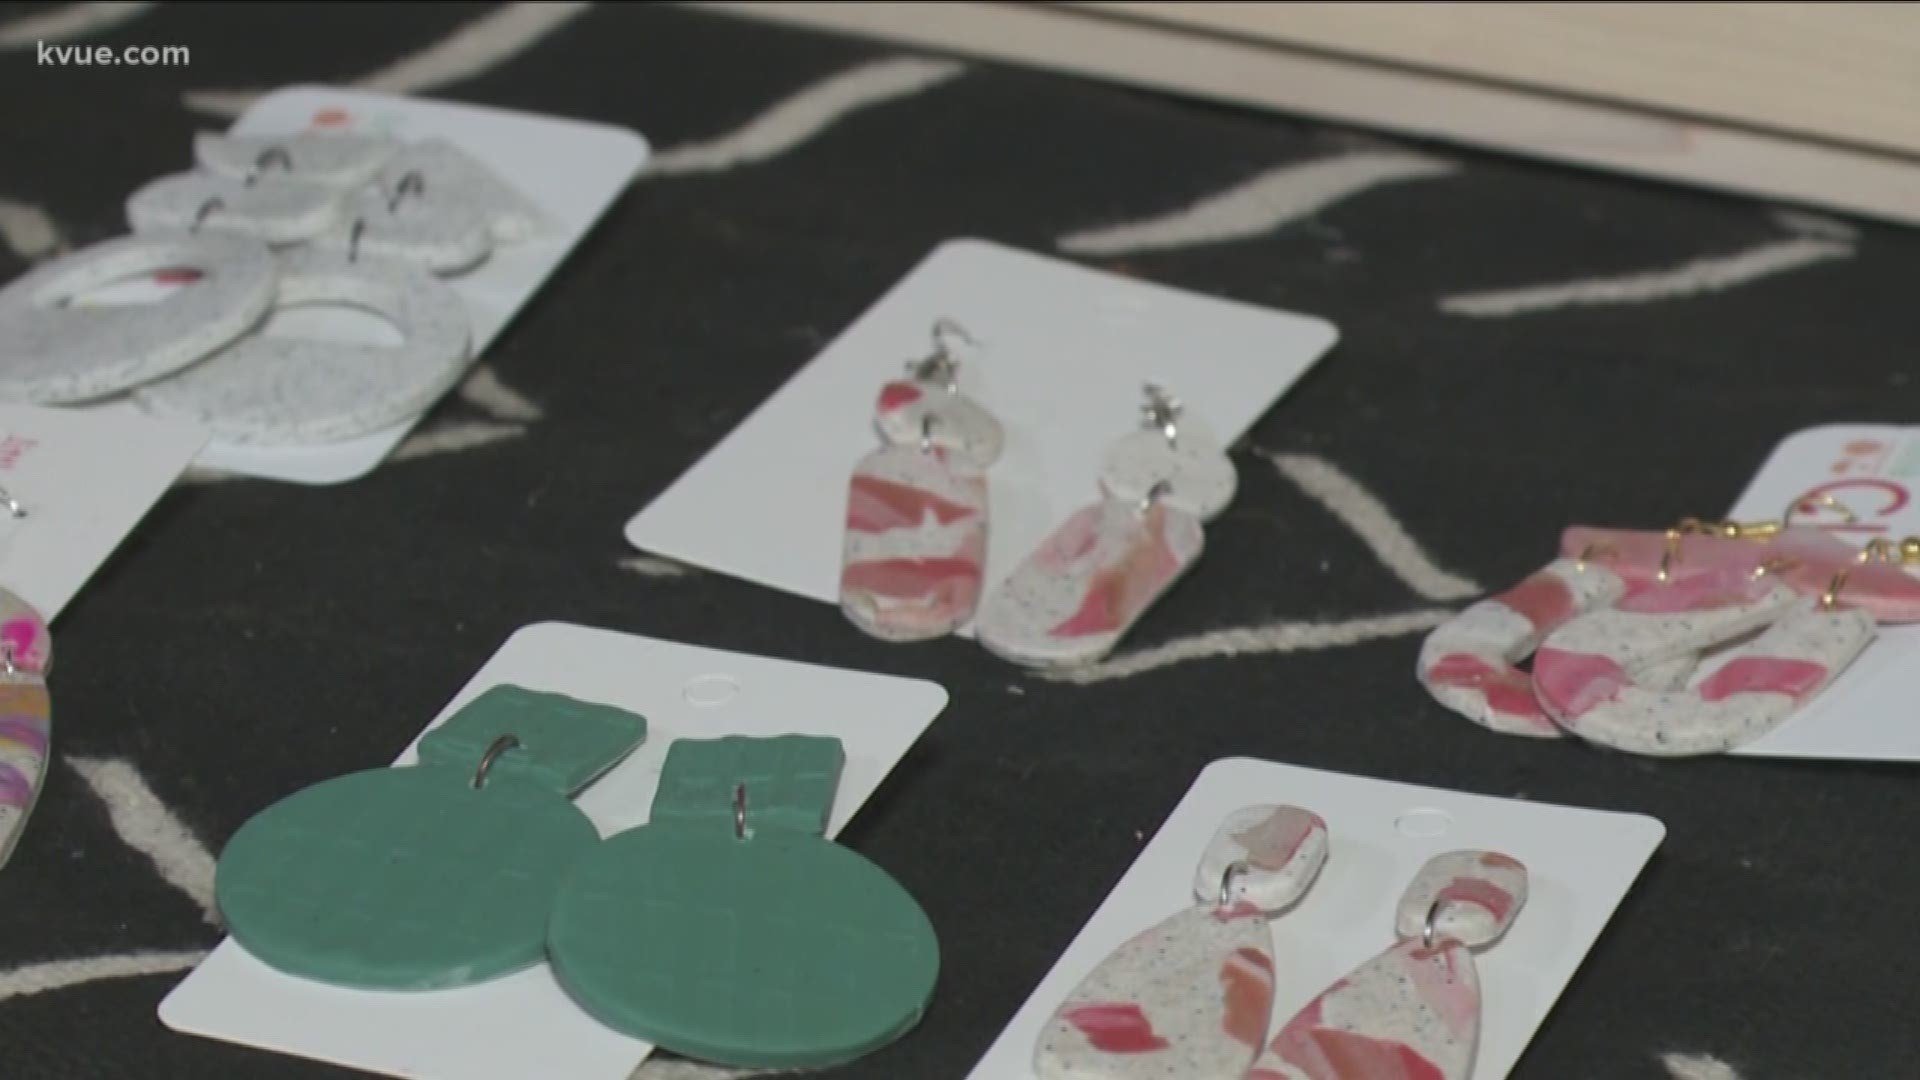 KVUE's Jenni Lee introduces us to Zoey Banks, 4th grader and jewelry maker.